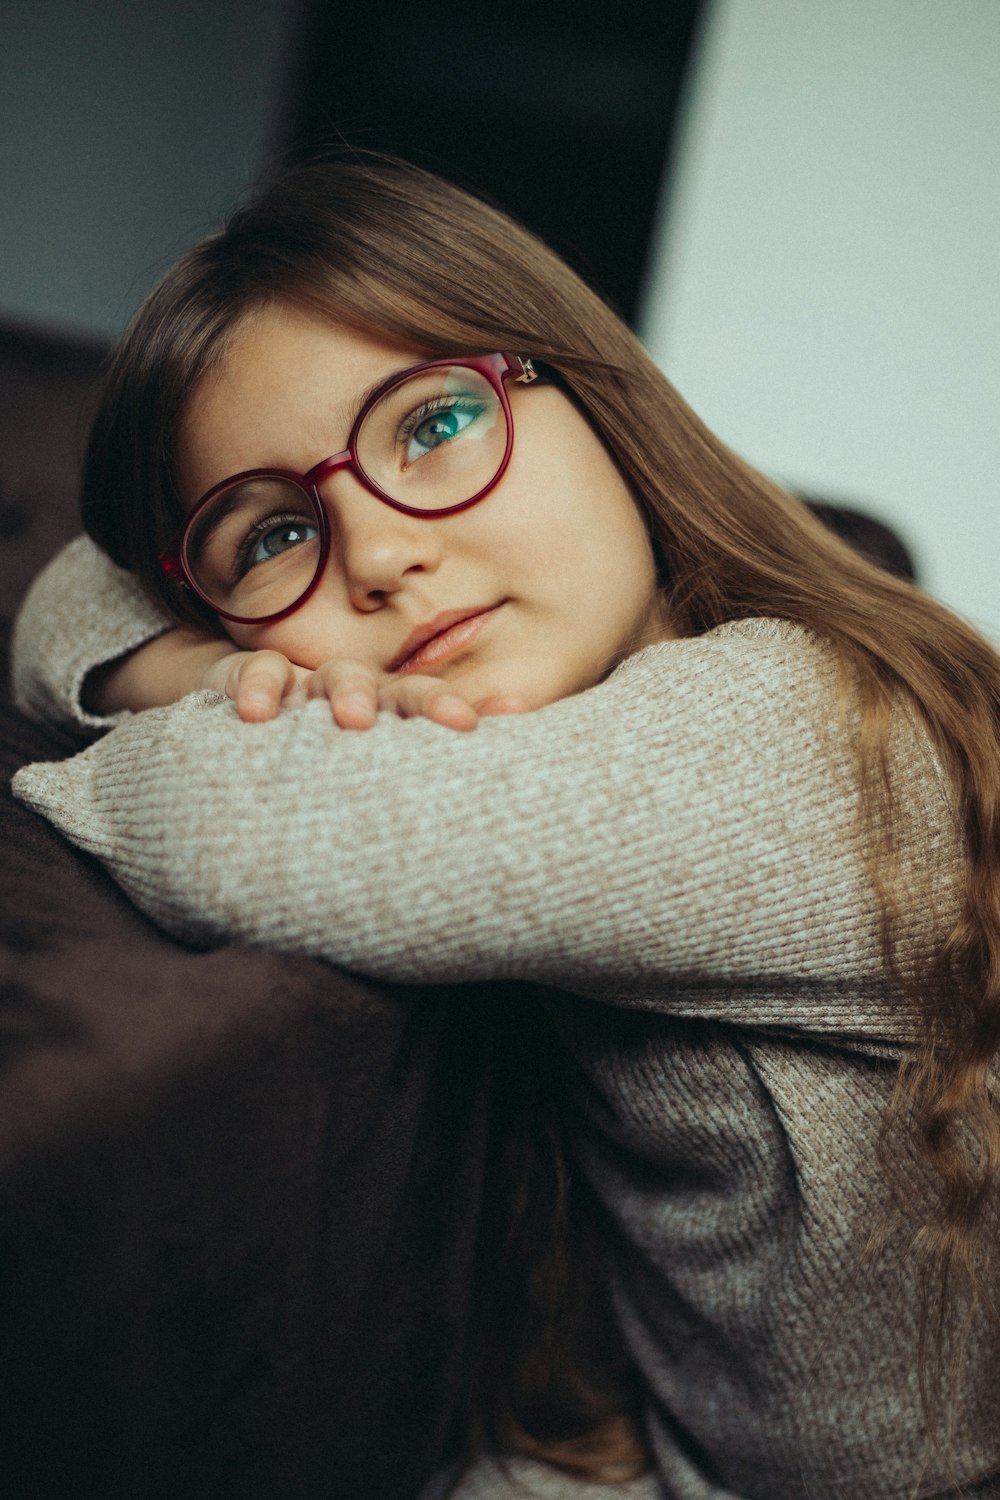 a young girl wearing glasses sitting on a couch